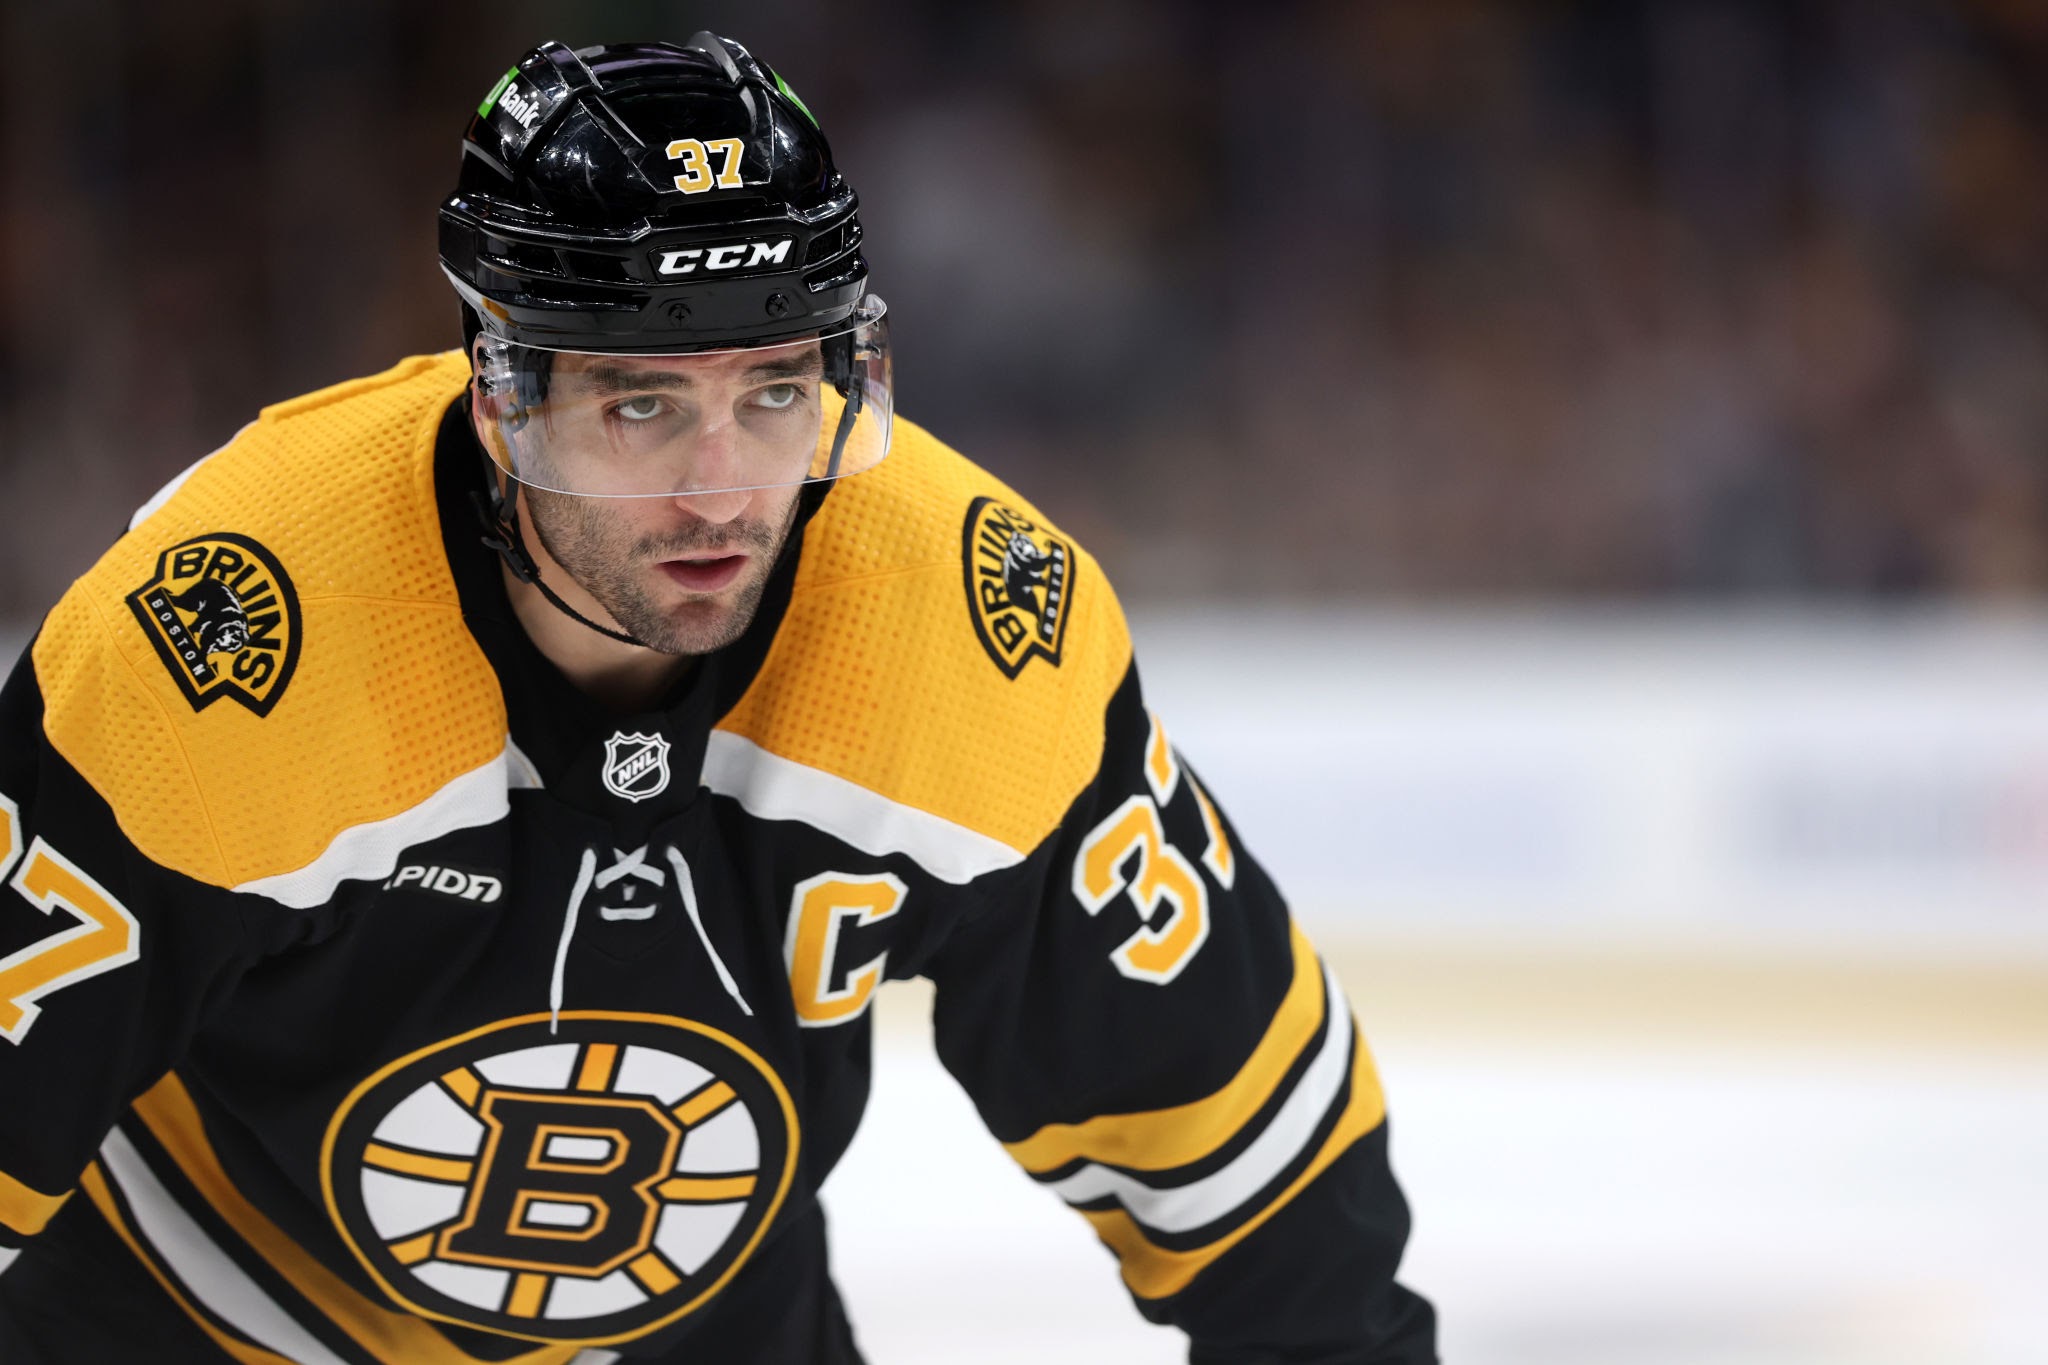 Patrice Bergeron Biography: Age, Net Worth, Instagram, Spouse, Height, Wiki, Parents, Awards